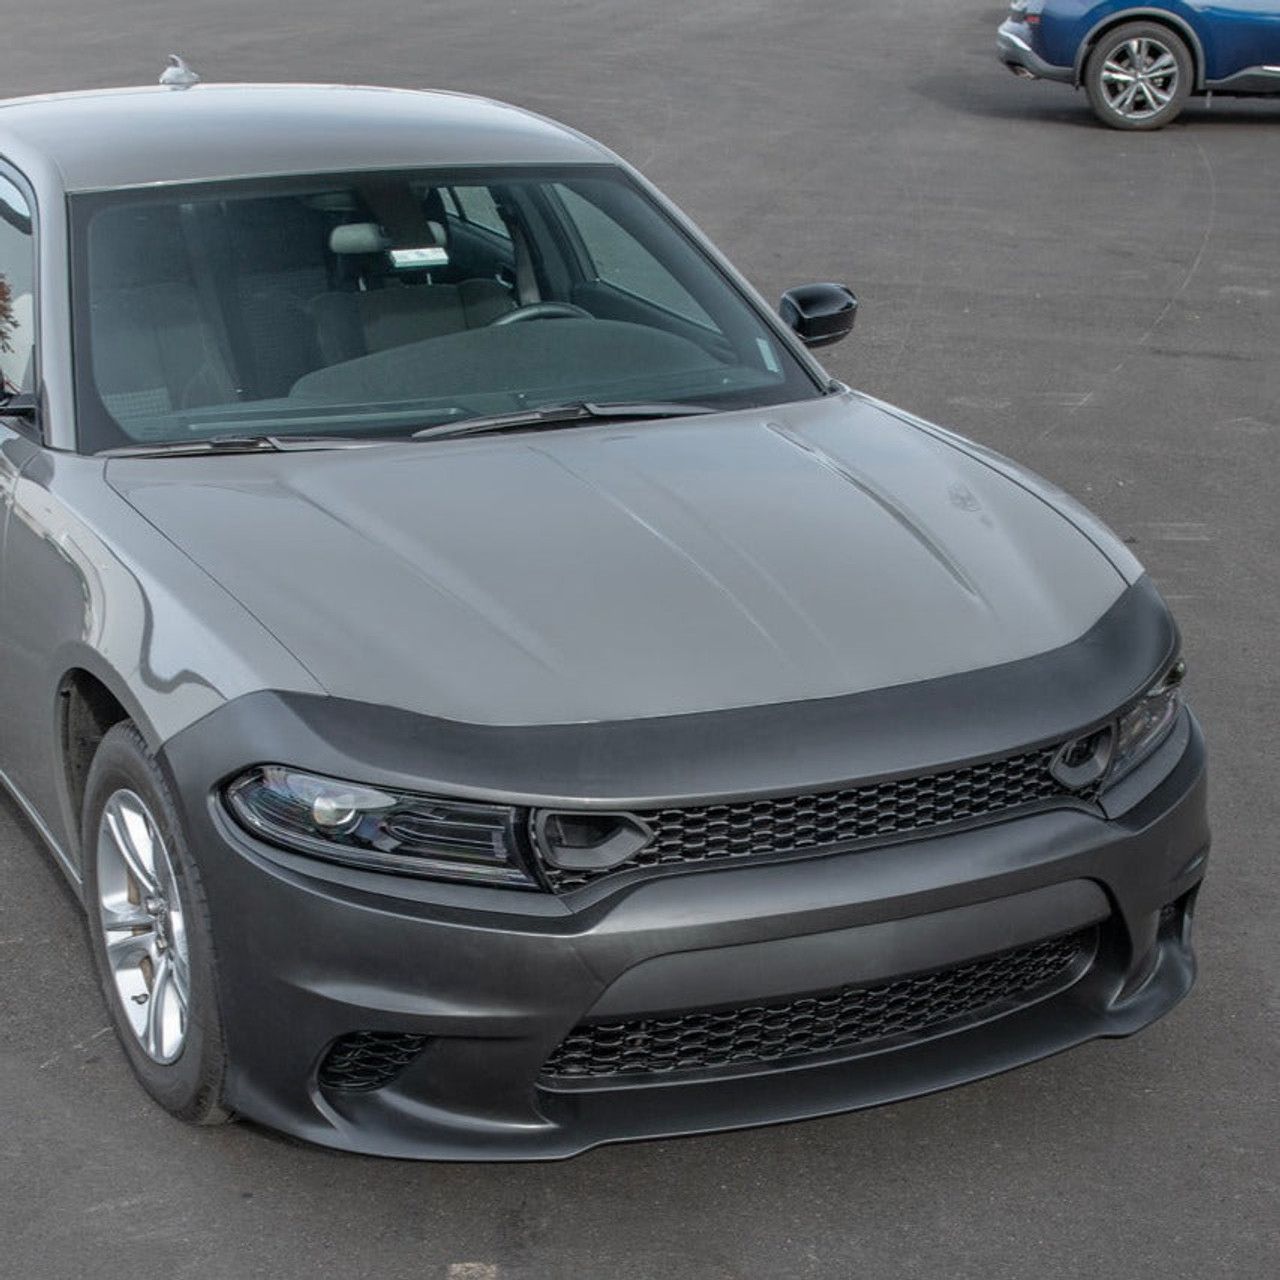 EOS Front Bumper Cover - 2015+ Dodge Charger Hellcat Style